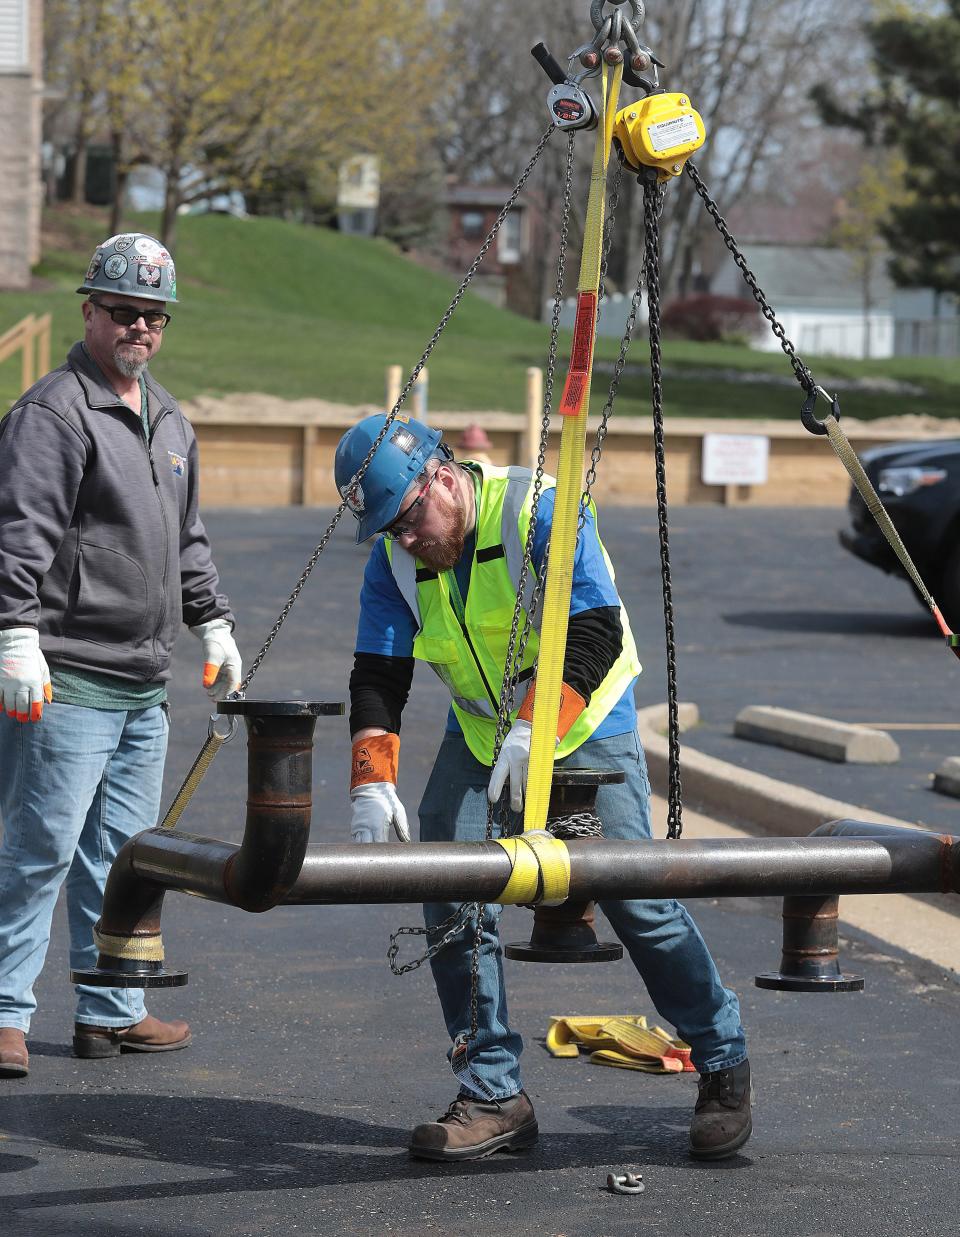 Competitor Vince Dodgson, right, of Plumbers & Pipefitters Local 396 out of Youngstown works on rigging infrastructure while watched by judge Steve Masterson out of Local 110 Norfolk, Virginia, during a statewide pipefitting competition last year in Canton.